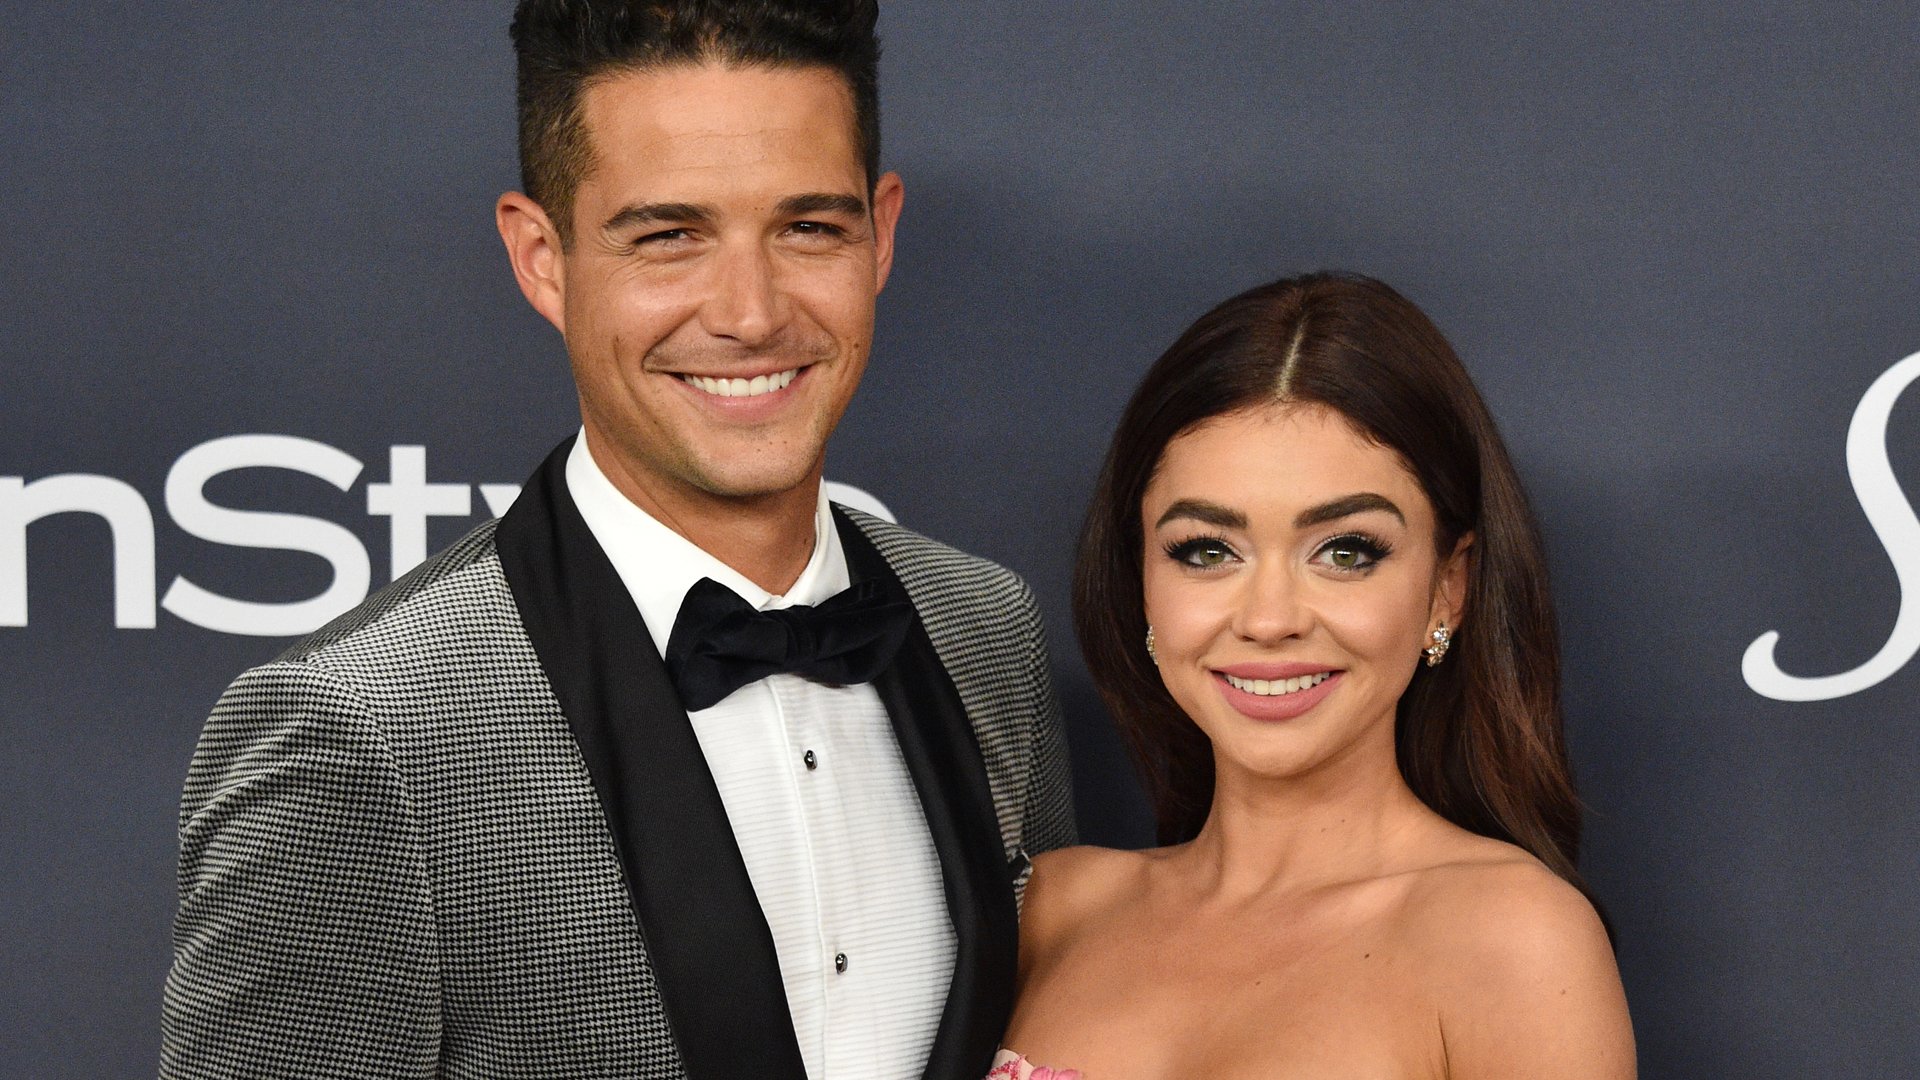 Wells Adams and Sarah Hyland attend the 21st Annual Warner Bros. And InStyle Golden Globe After Party at The Beverly Hilton Hotel on January 05, 2020 in Beverly Hills, California.